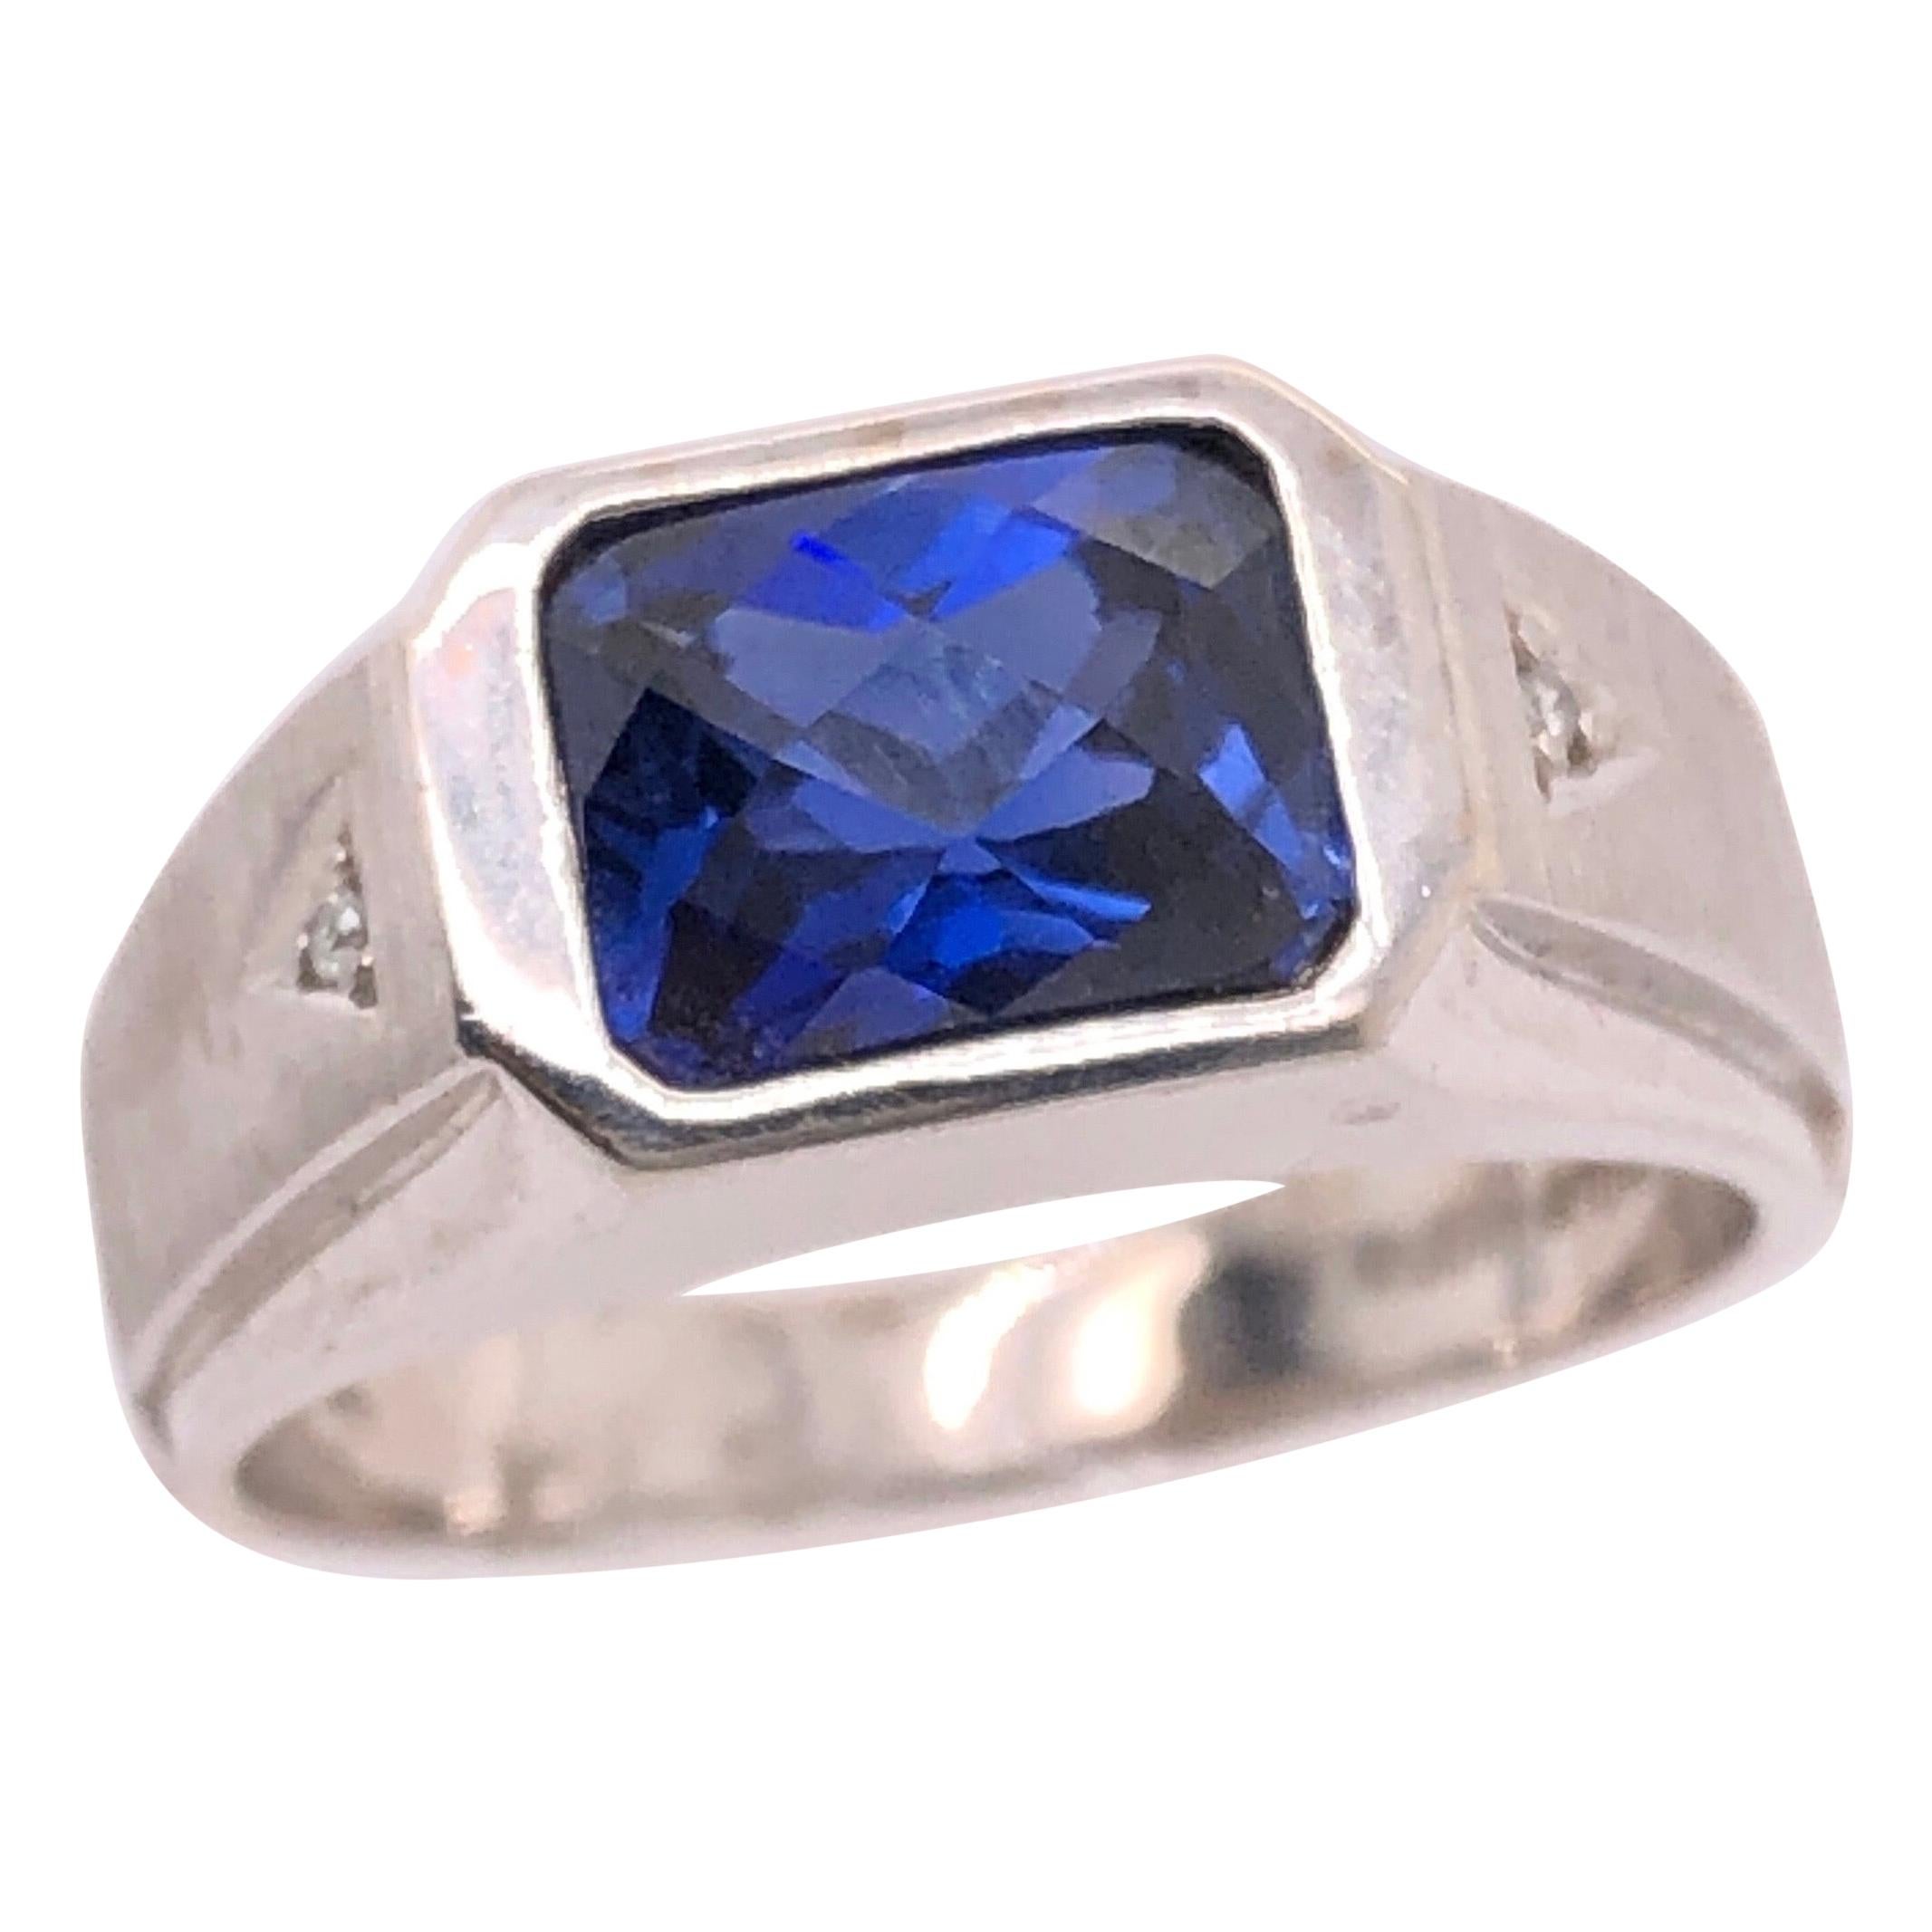 14 Karat White Gold Contemporary Sapphire Ring with Diamond Accents